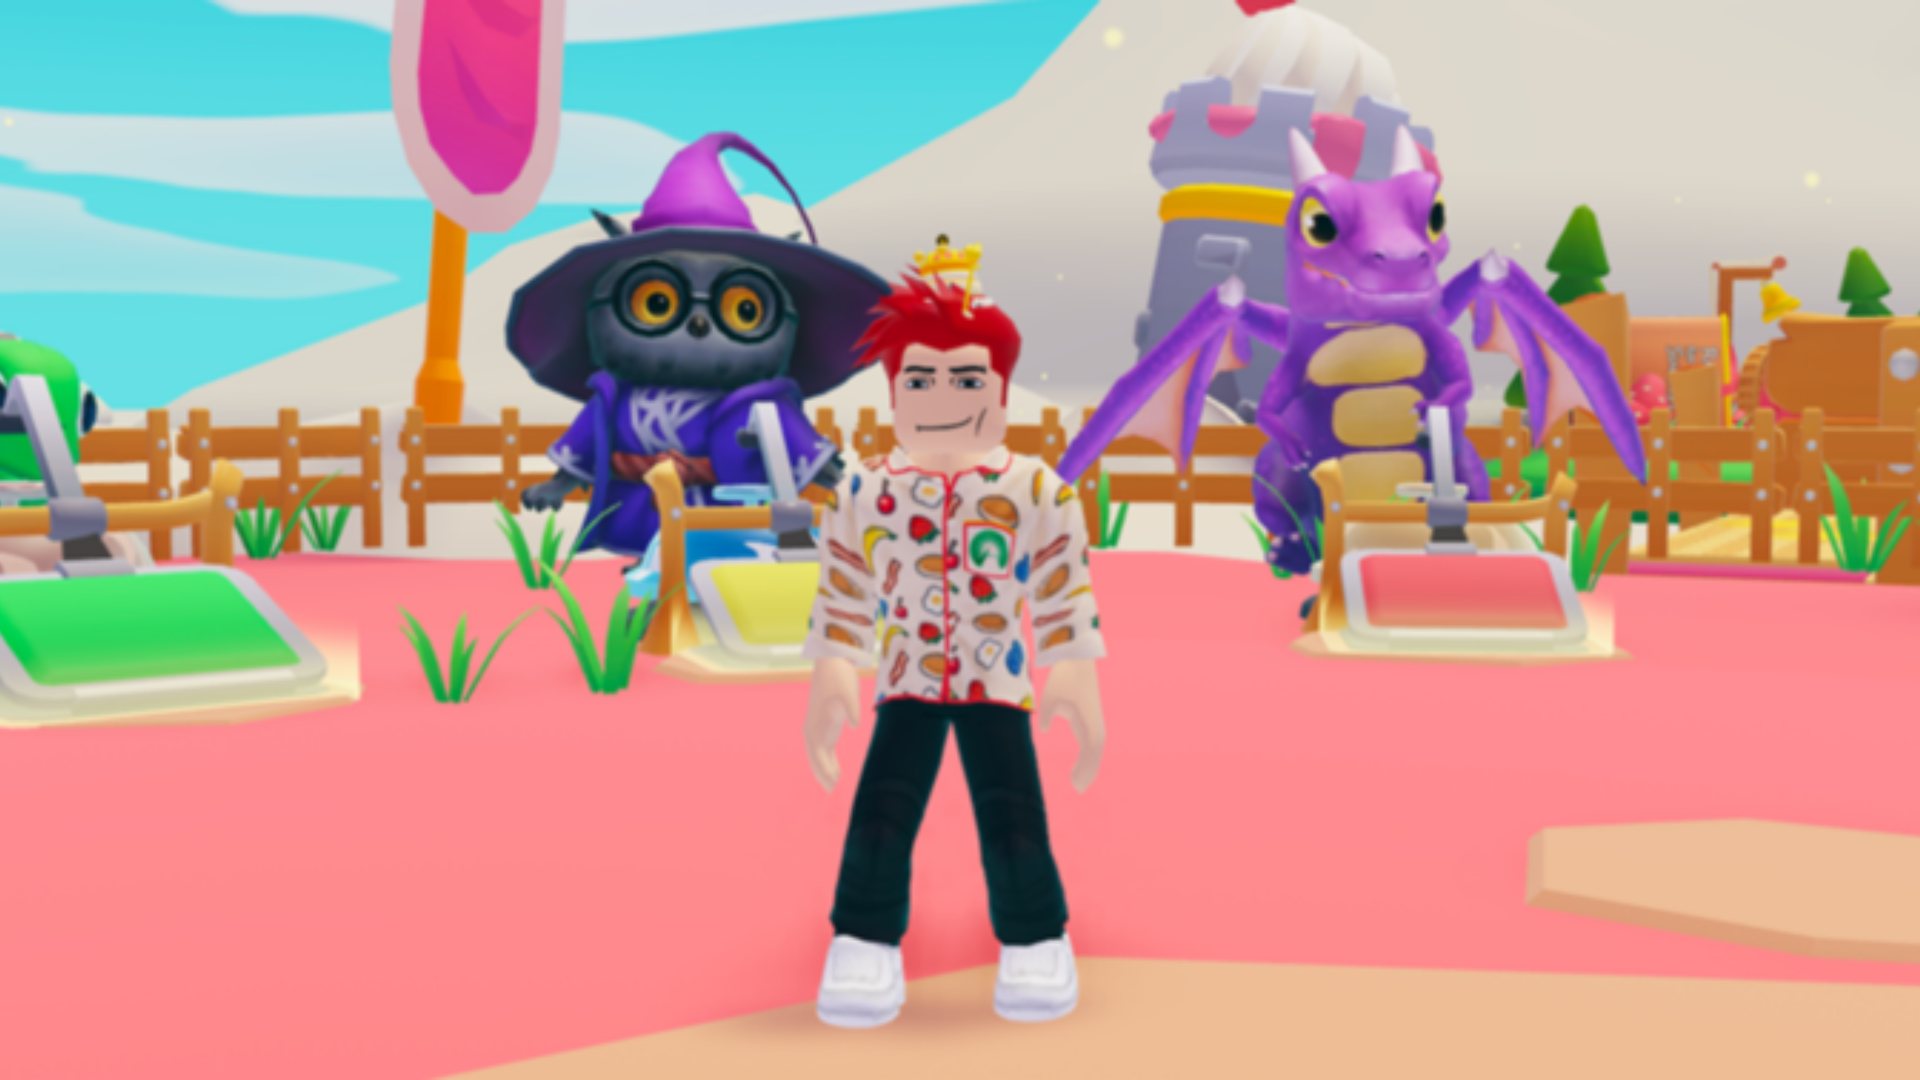 Pancake Empire Tower Tycoon codes: a red-haired character stands in front of a giant owl in wizard hat and a purple dragon.